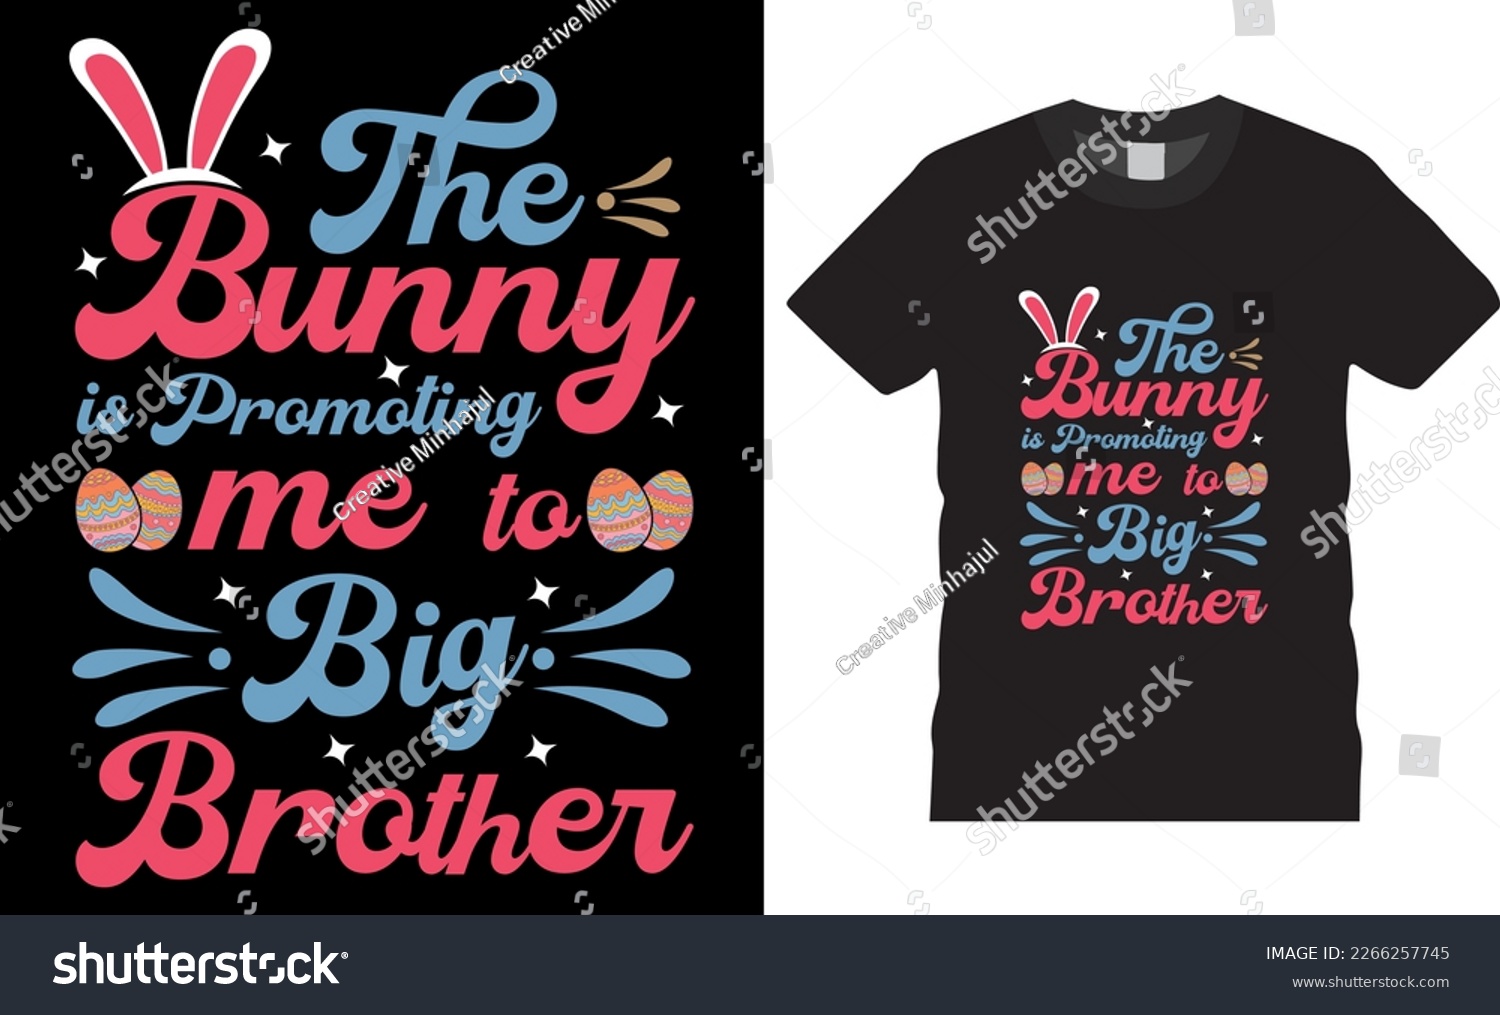 SVG of Happy easter rabbit, bunny tshirt vector design template. The Bunny is Promoting me to big Brother t-shirt design.Ready to print for apparel, poster, mug and greeting plate illustration. svg